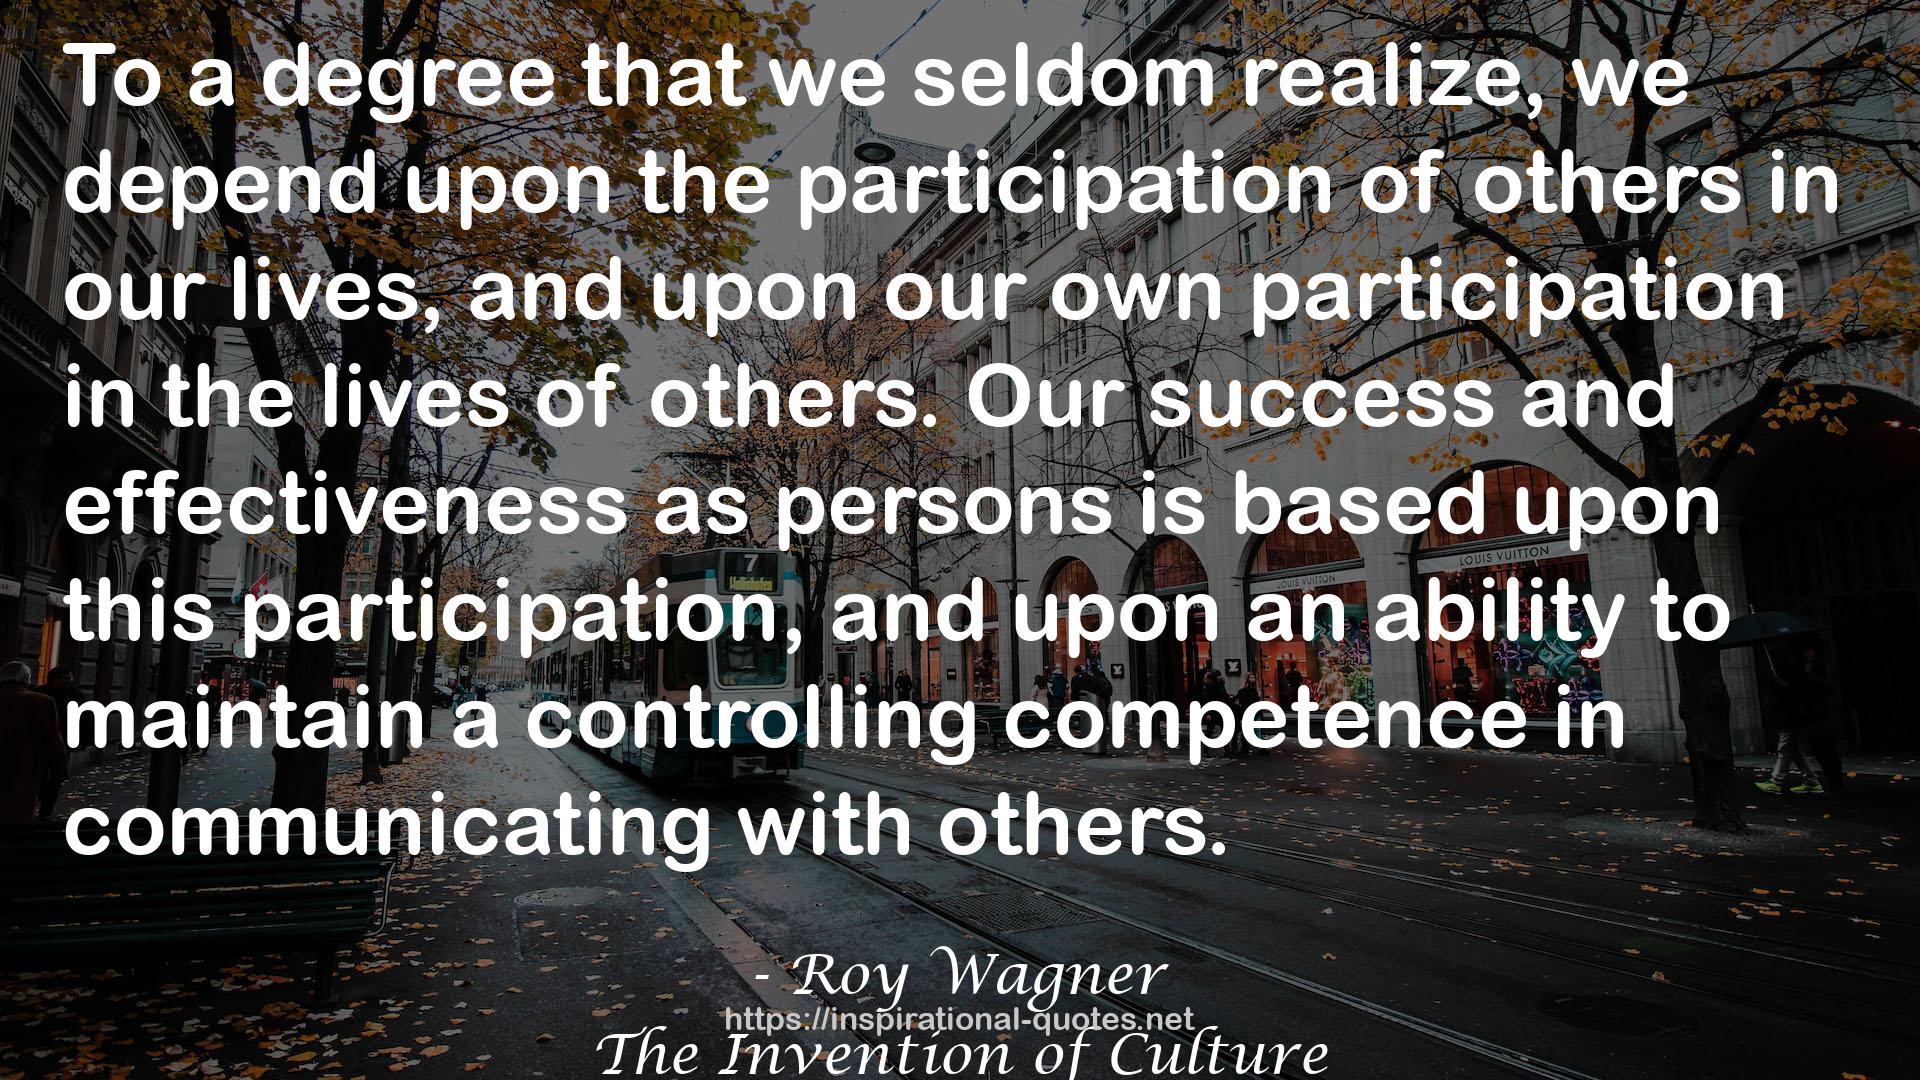 Roy Wagner QUOTES